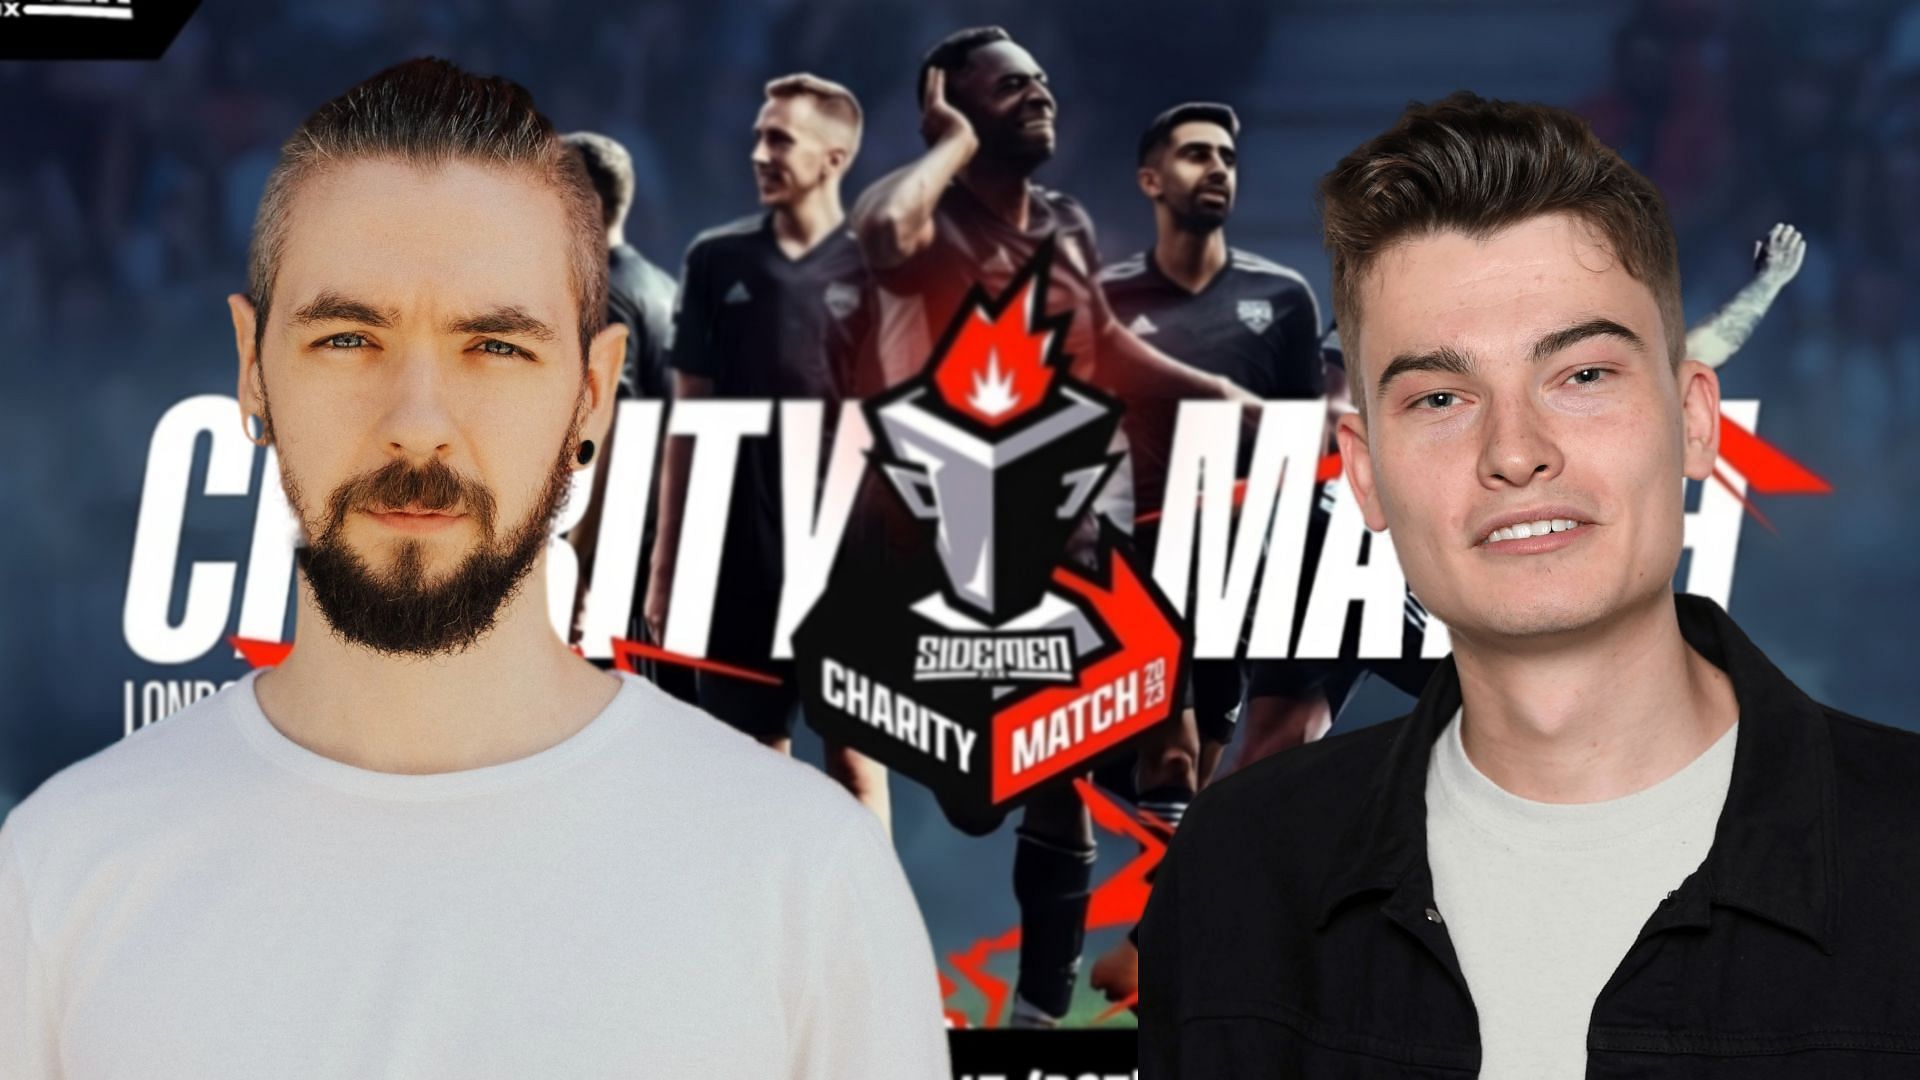 IShowSpeed has been confirmed for the Sidemen Charity Match 2023